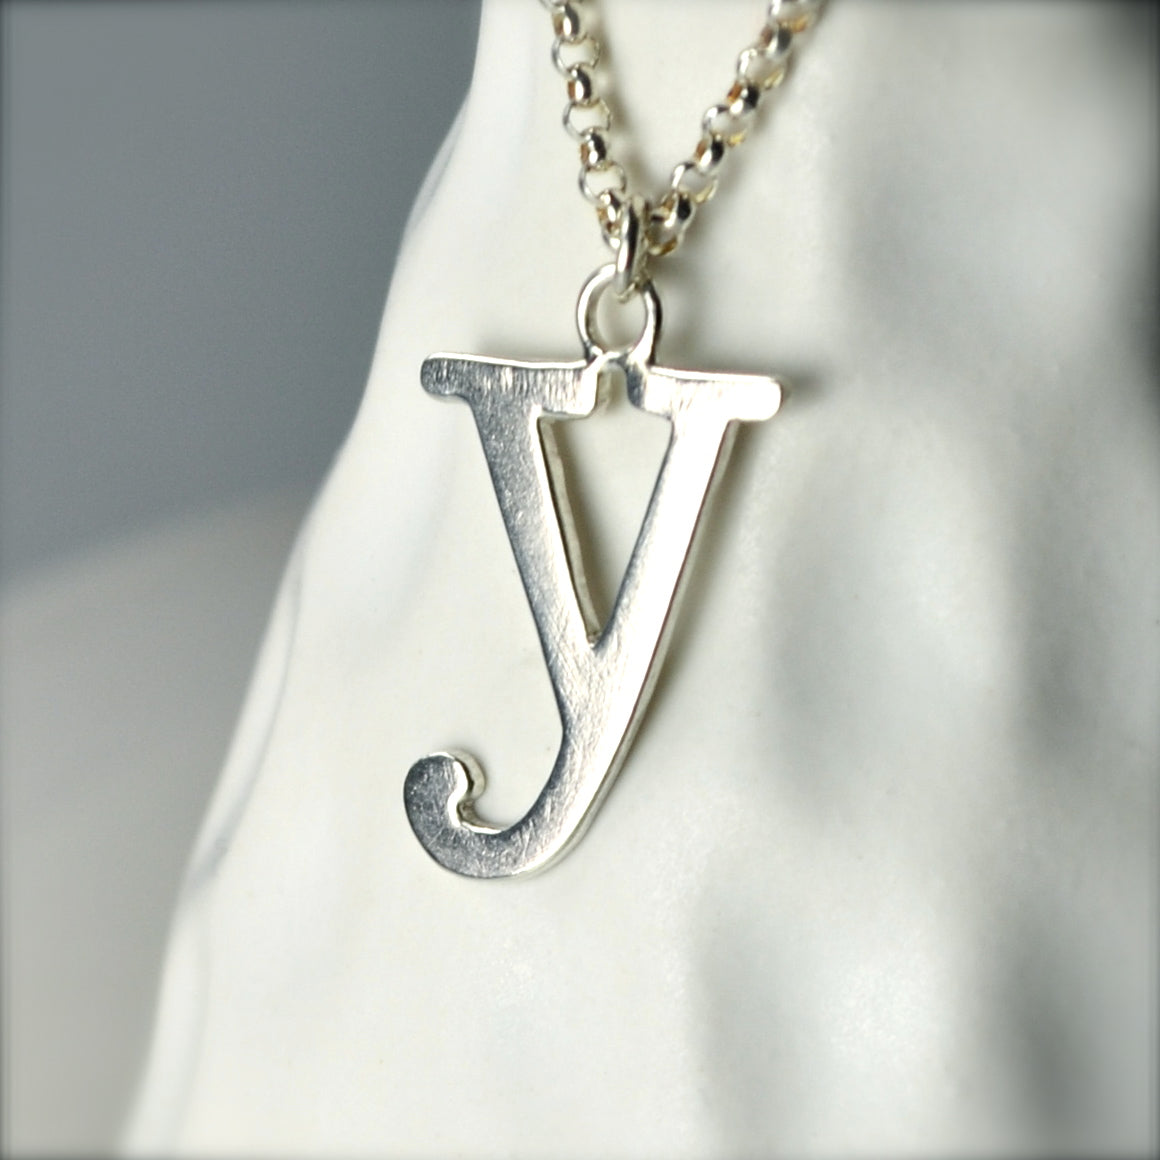 Sterling Silver Lower-Case Letter Pendants with 18 inch Chain